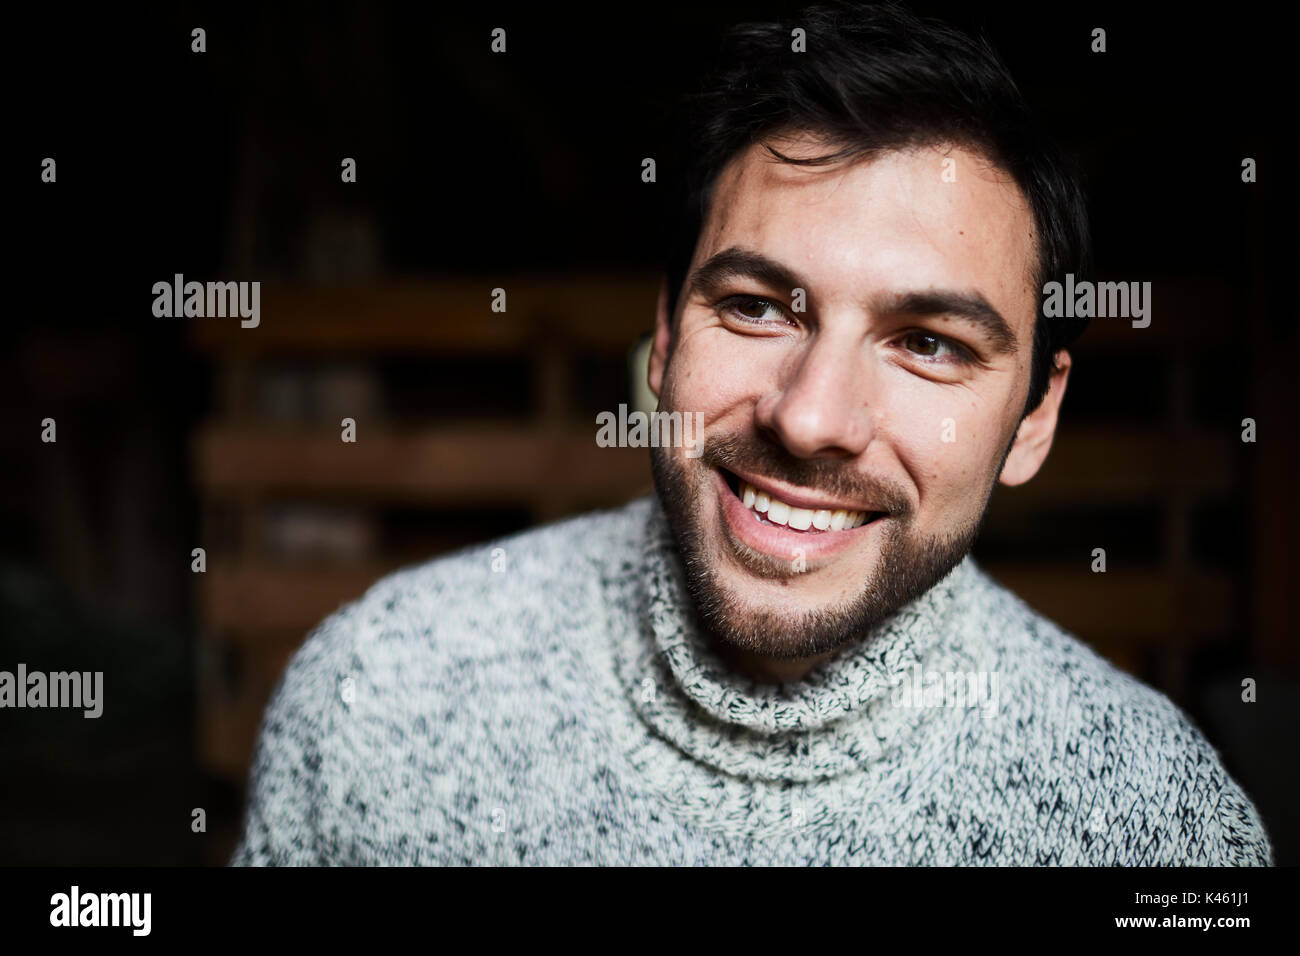 Barn, man with knitted pullover, cheerful, portrait, Stock Photo